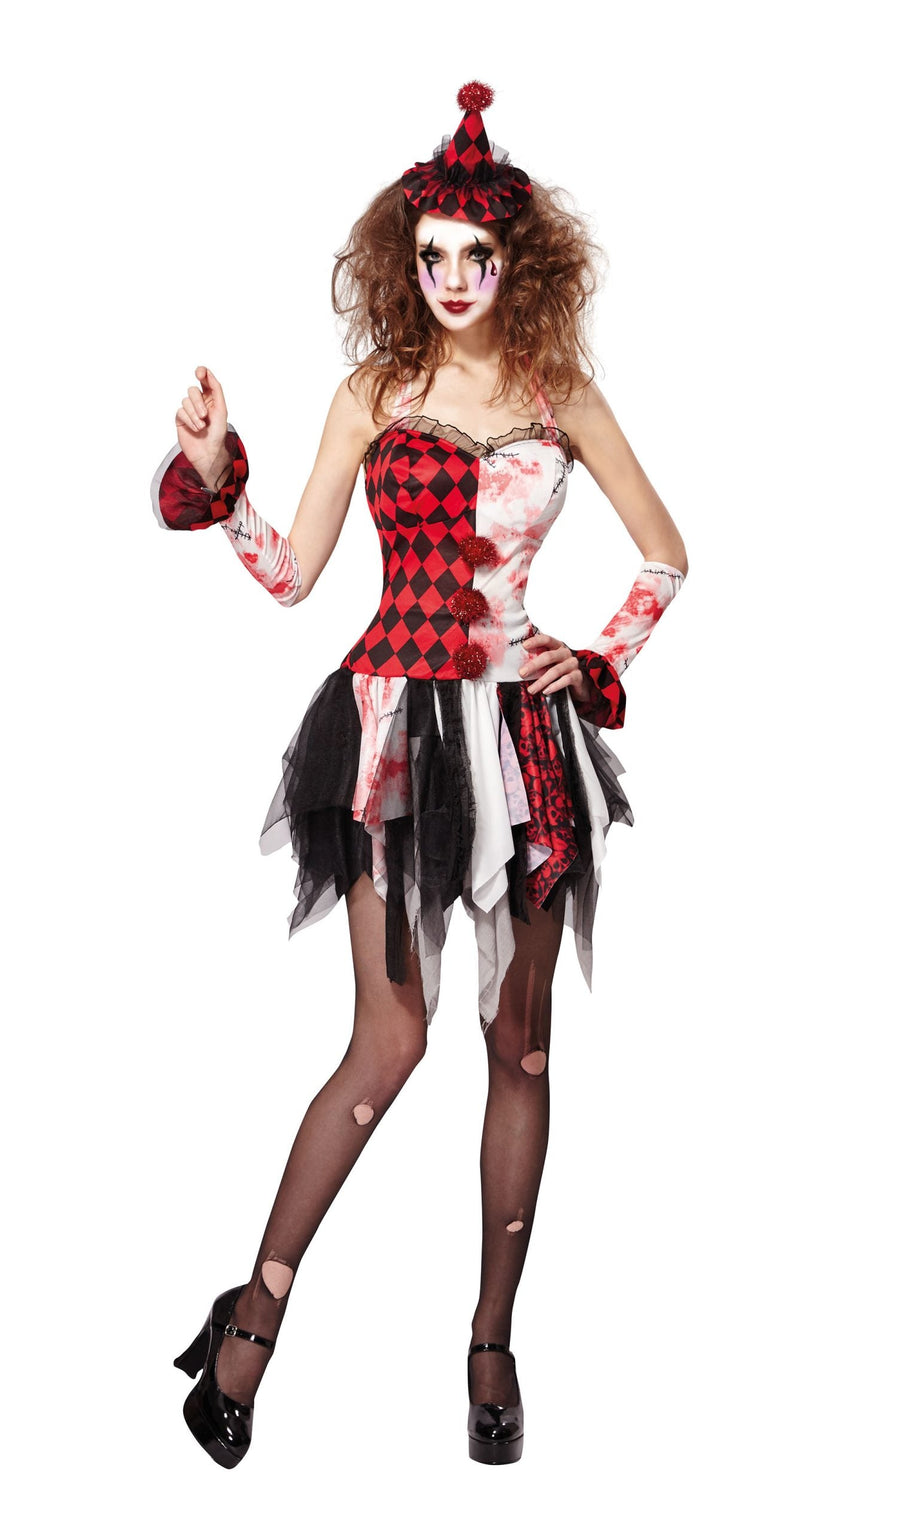 Jester Lady Scary Adult Costume Female_1